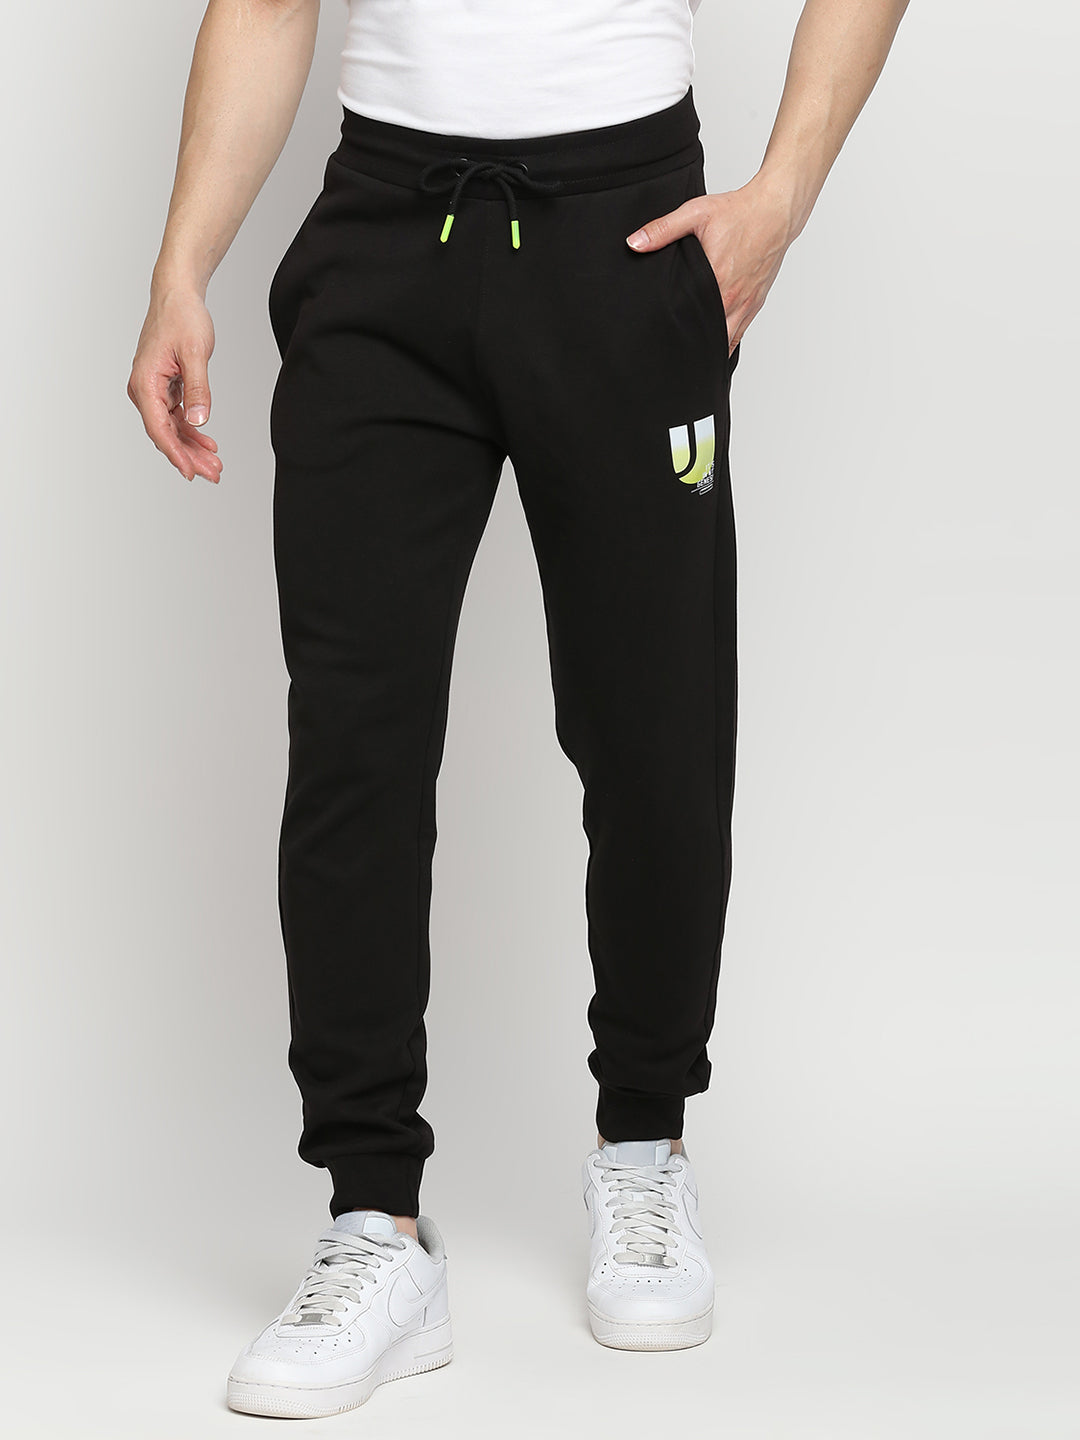 Men Cotton Blend Knitted Black Trackpant - Underjeans by Spykar